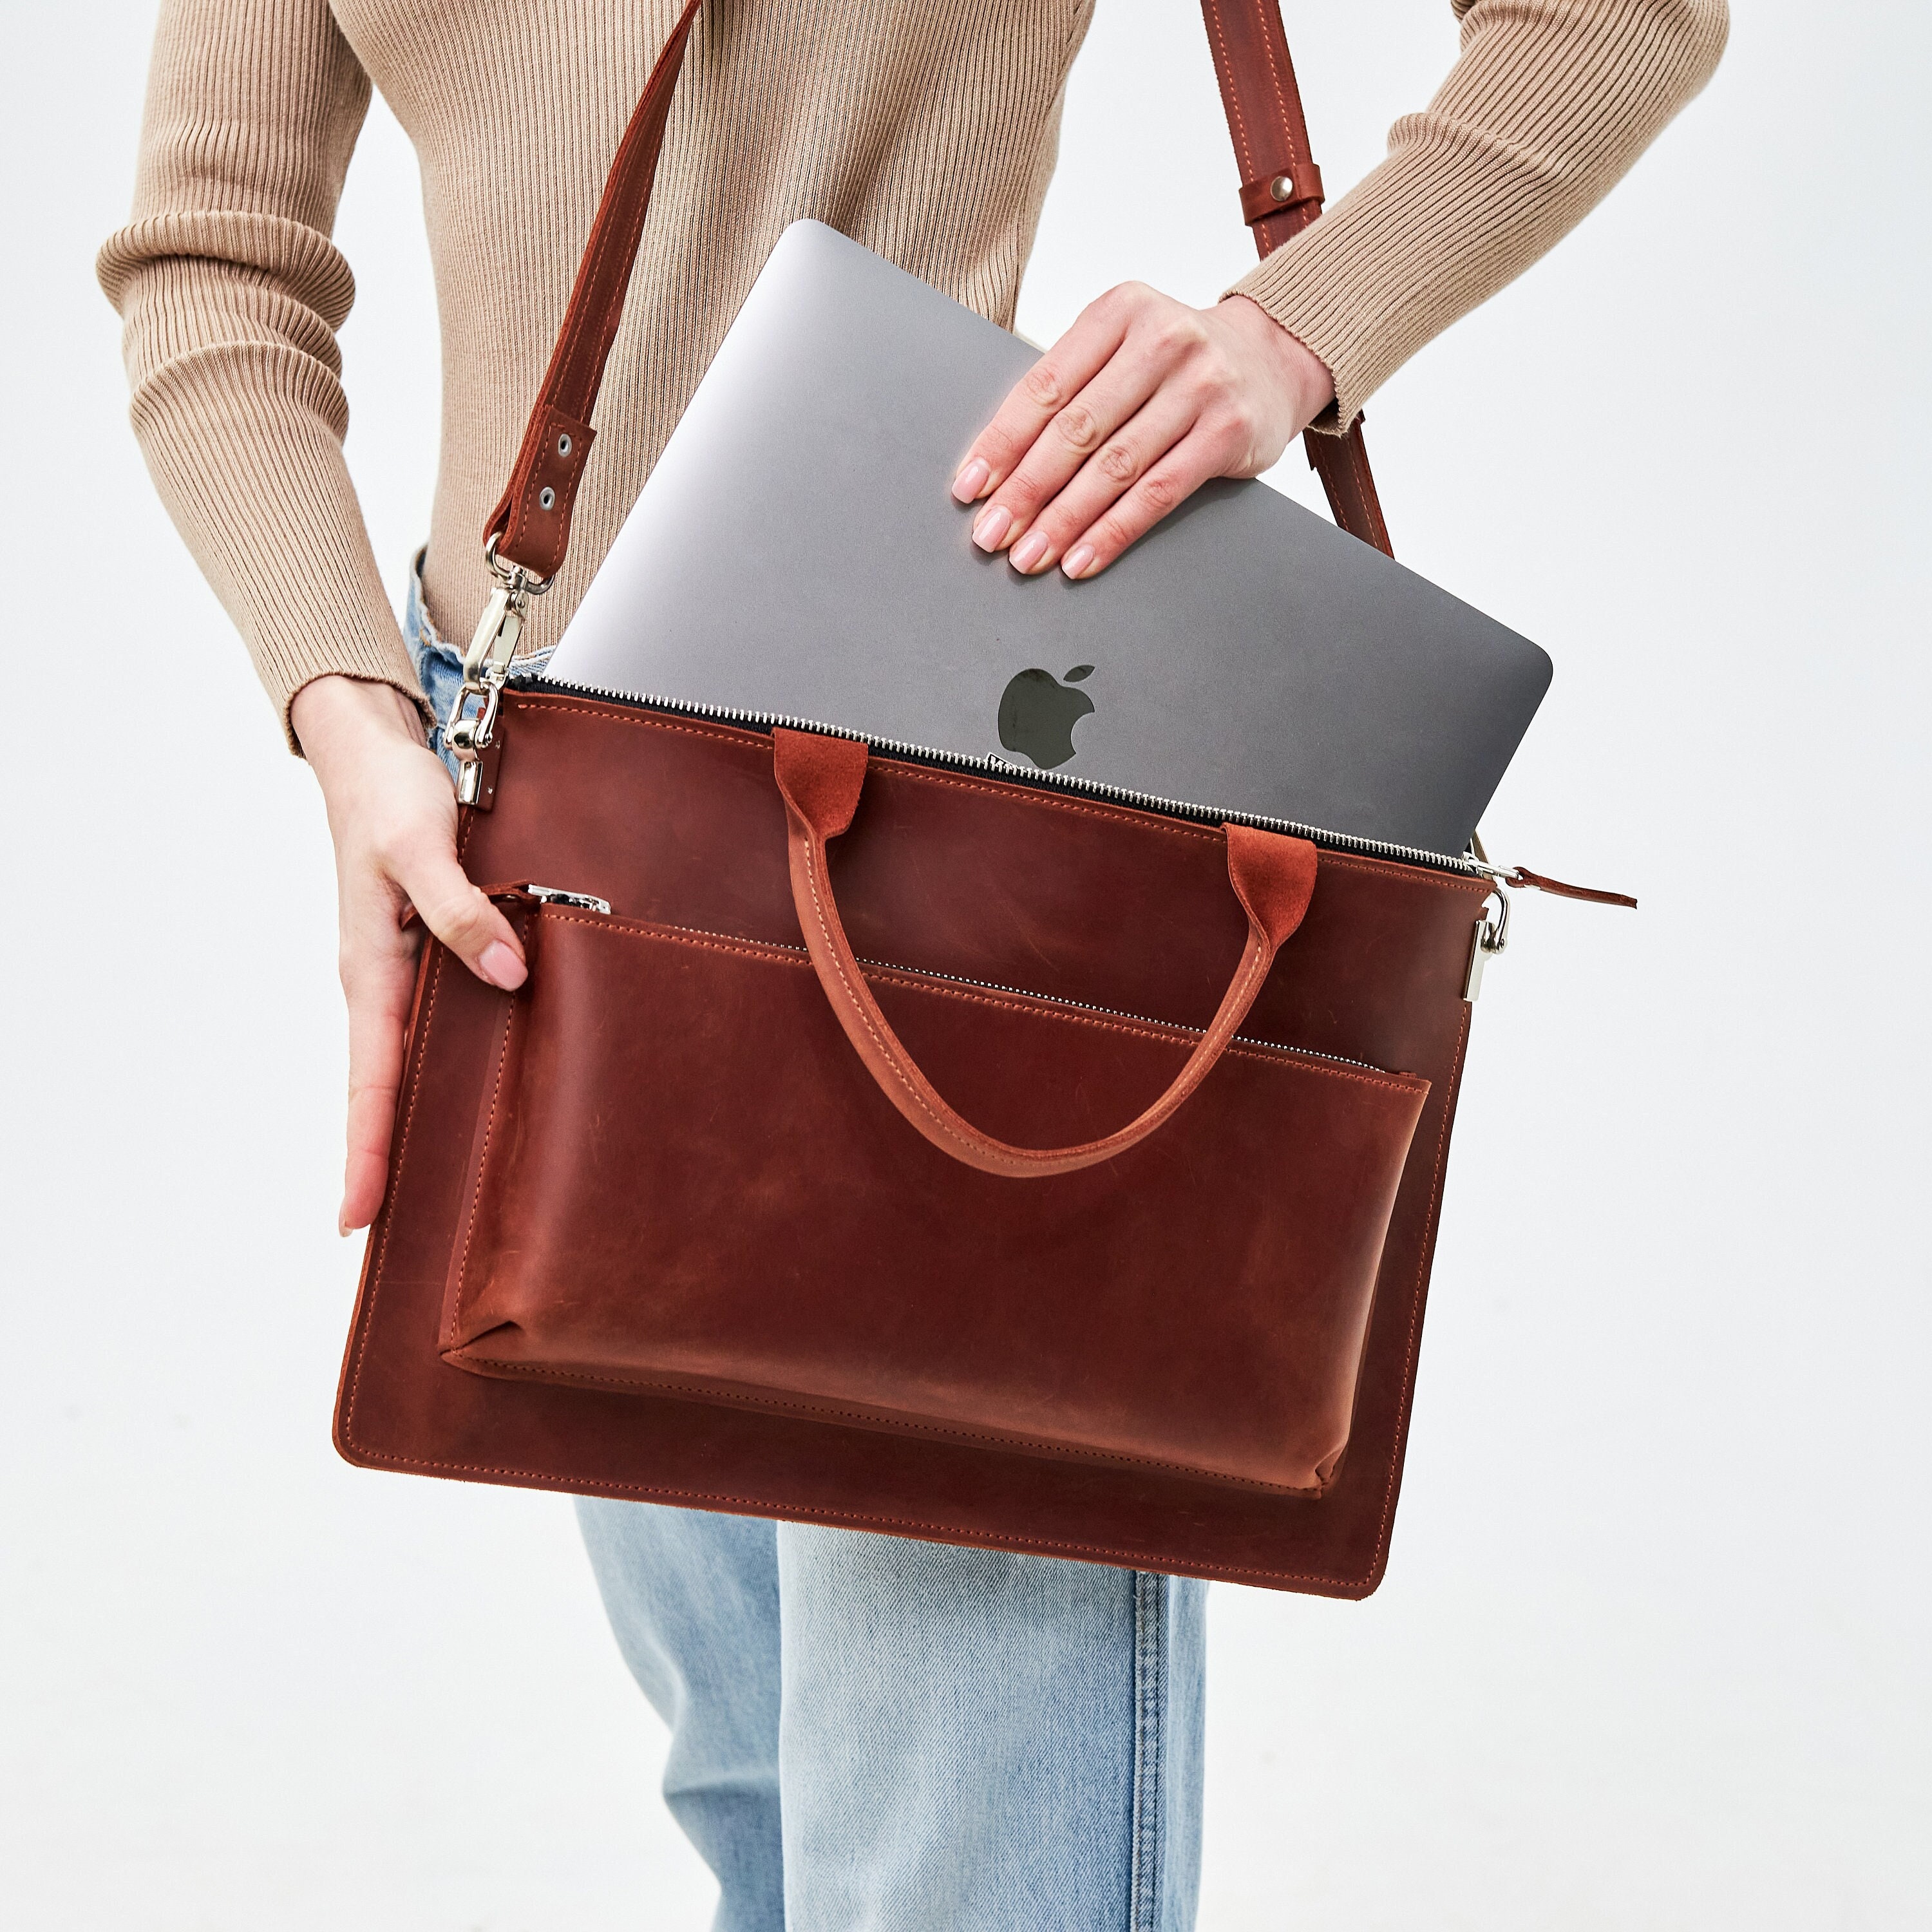 Women's Briefcase Computer 14 inch Bag For Macbook Air Leather Laptop  Handbag Work Office Ladies Crossbody Bags For Dell Acer Hp